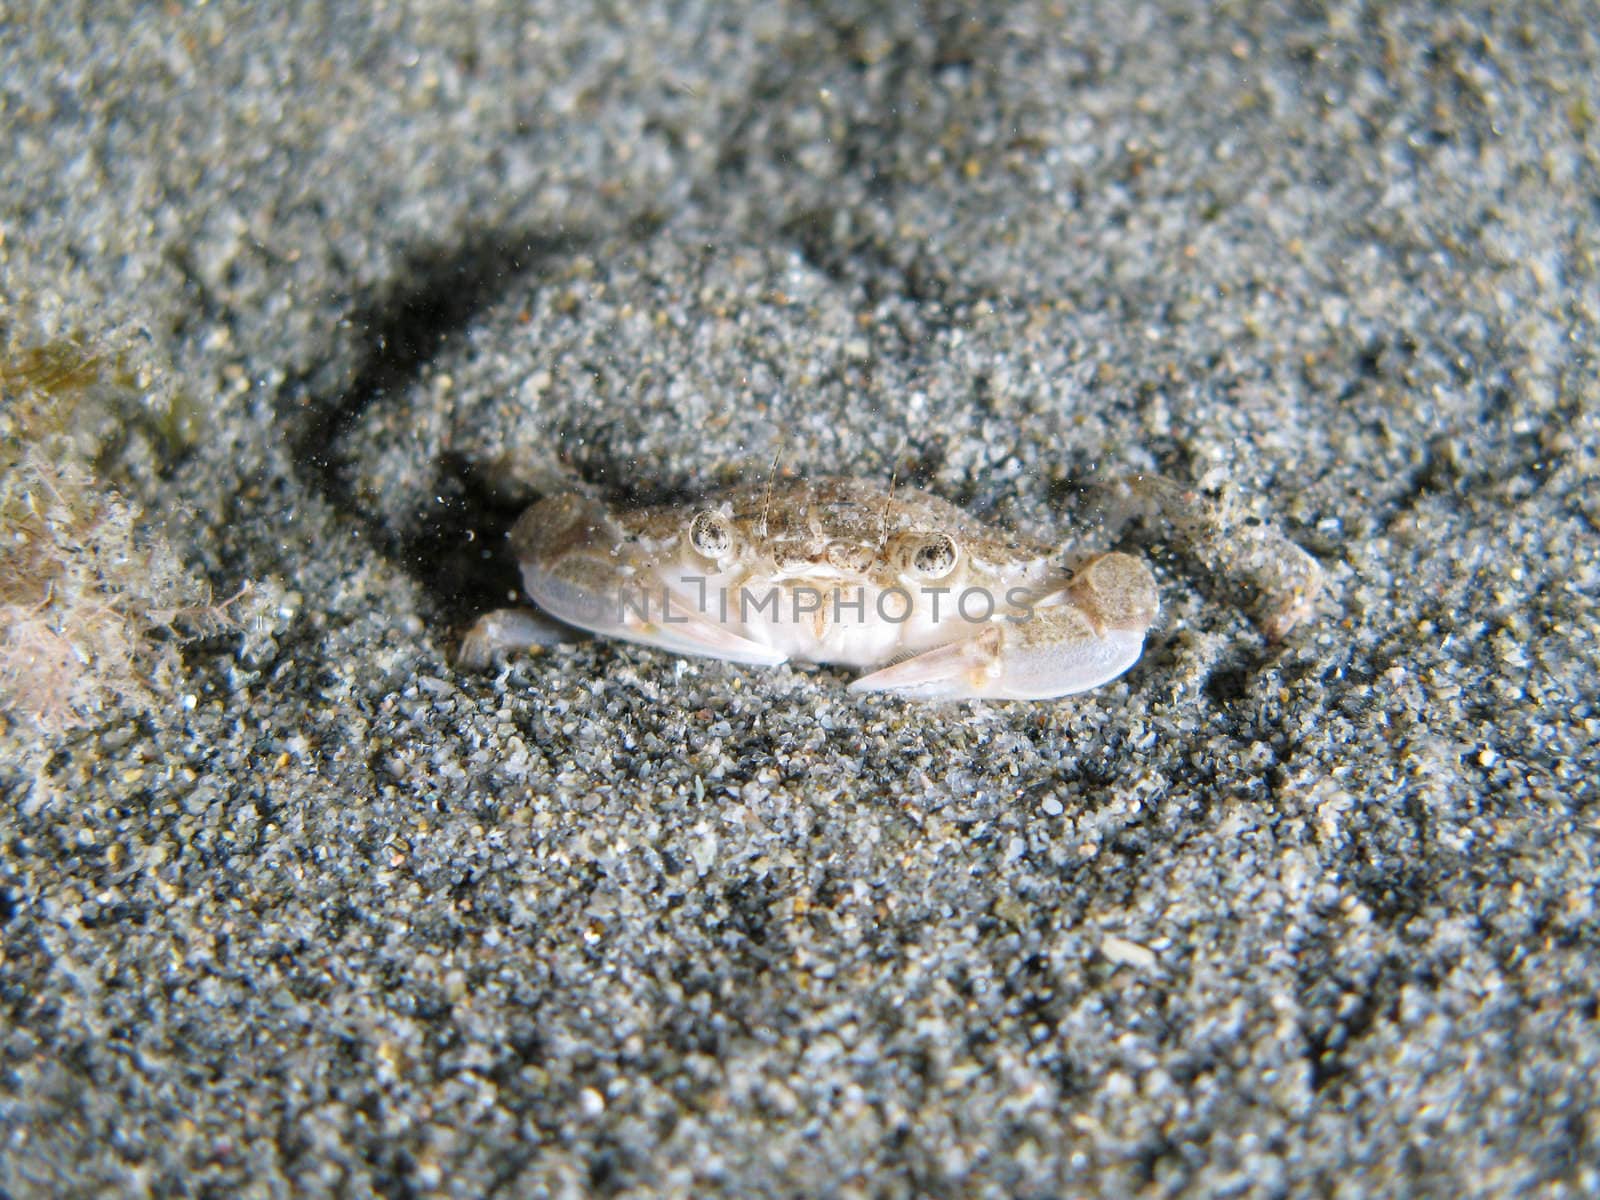 Crab going to hide himself under the sand.